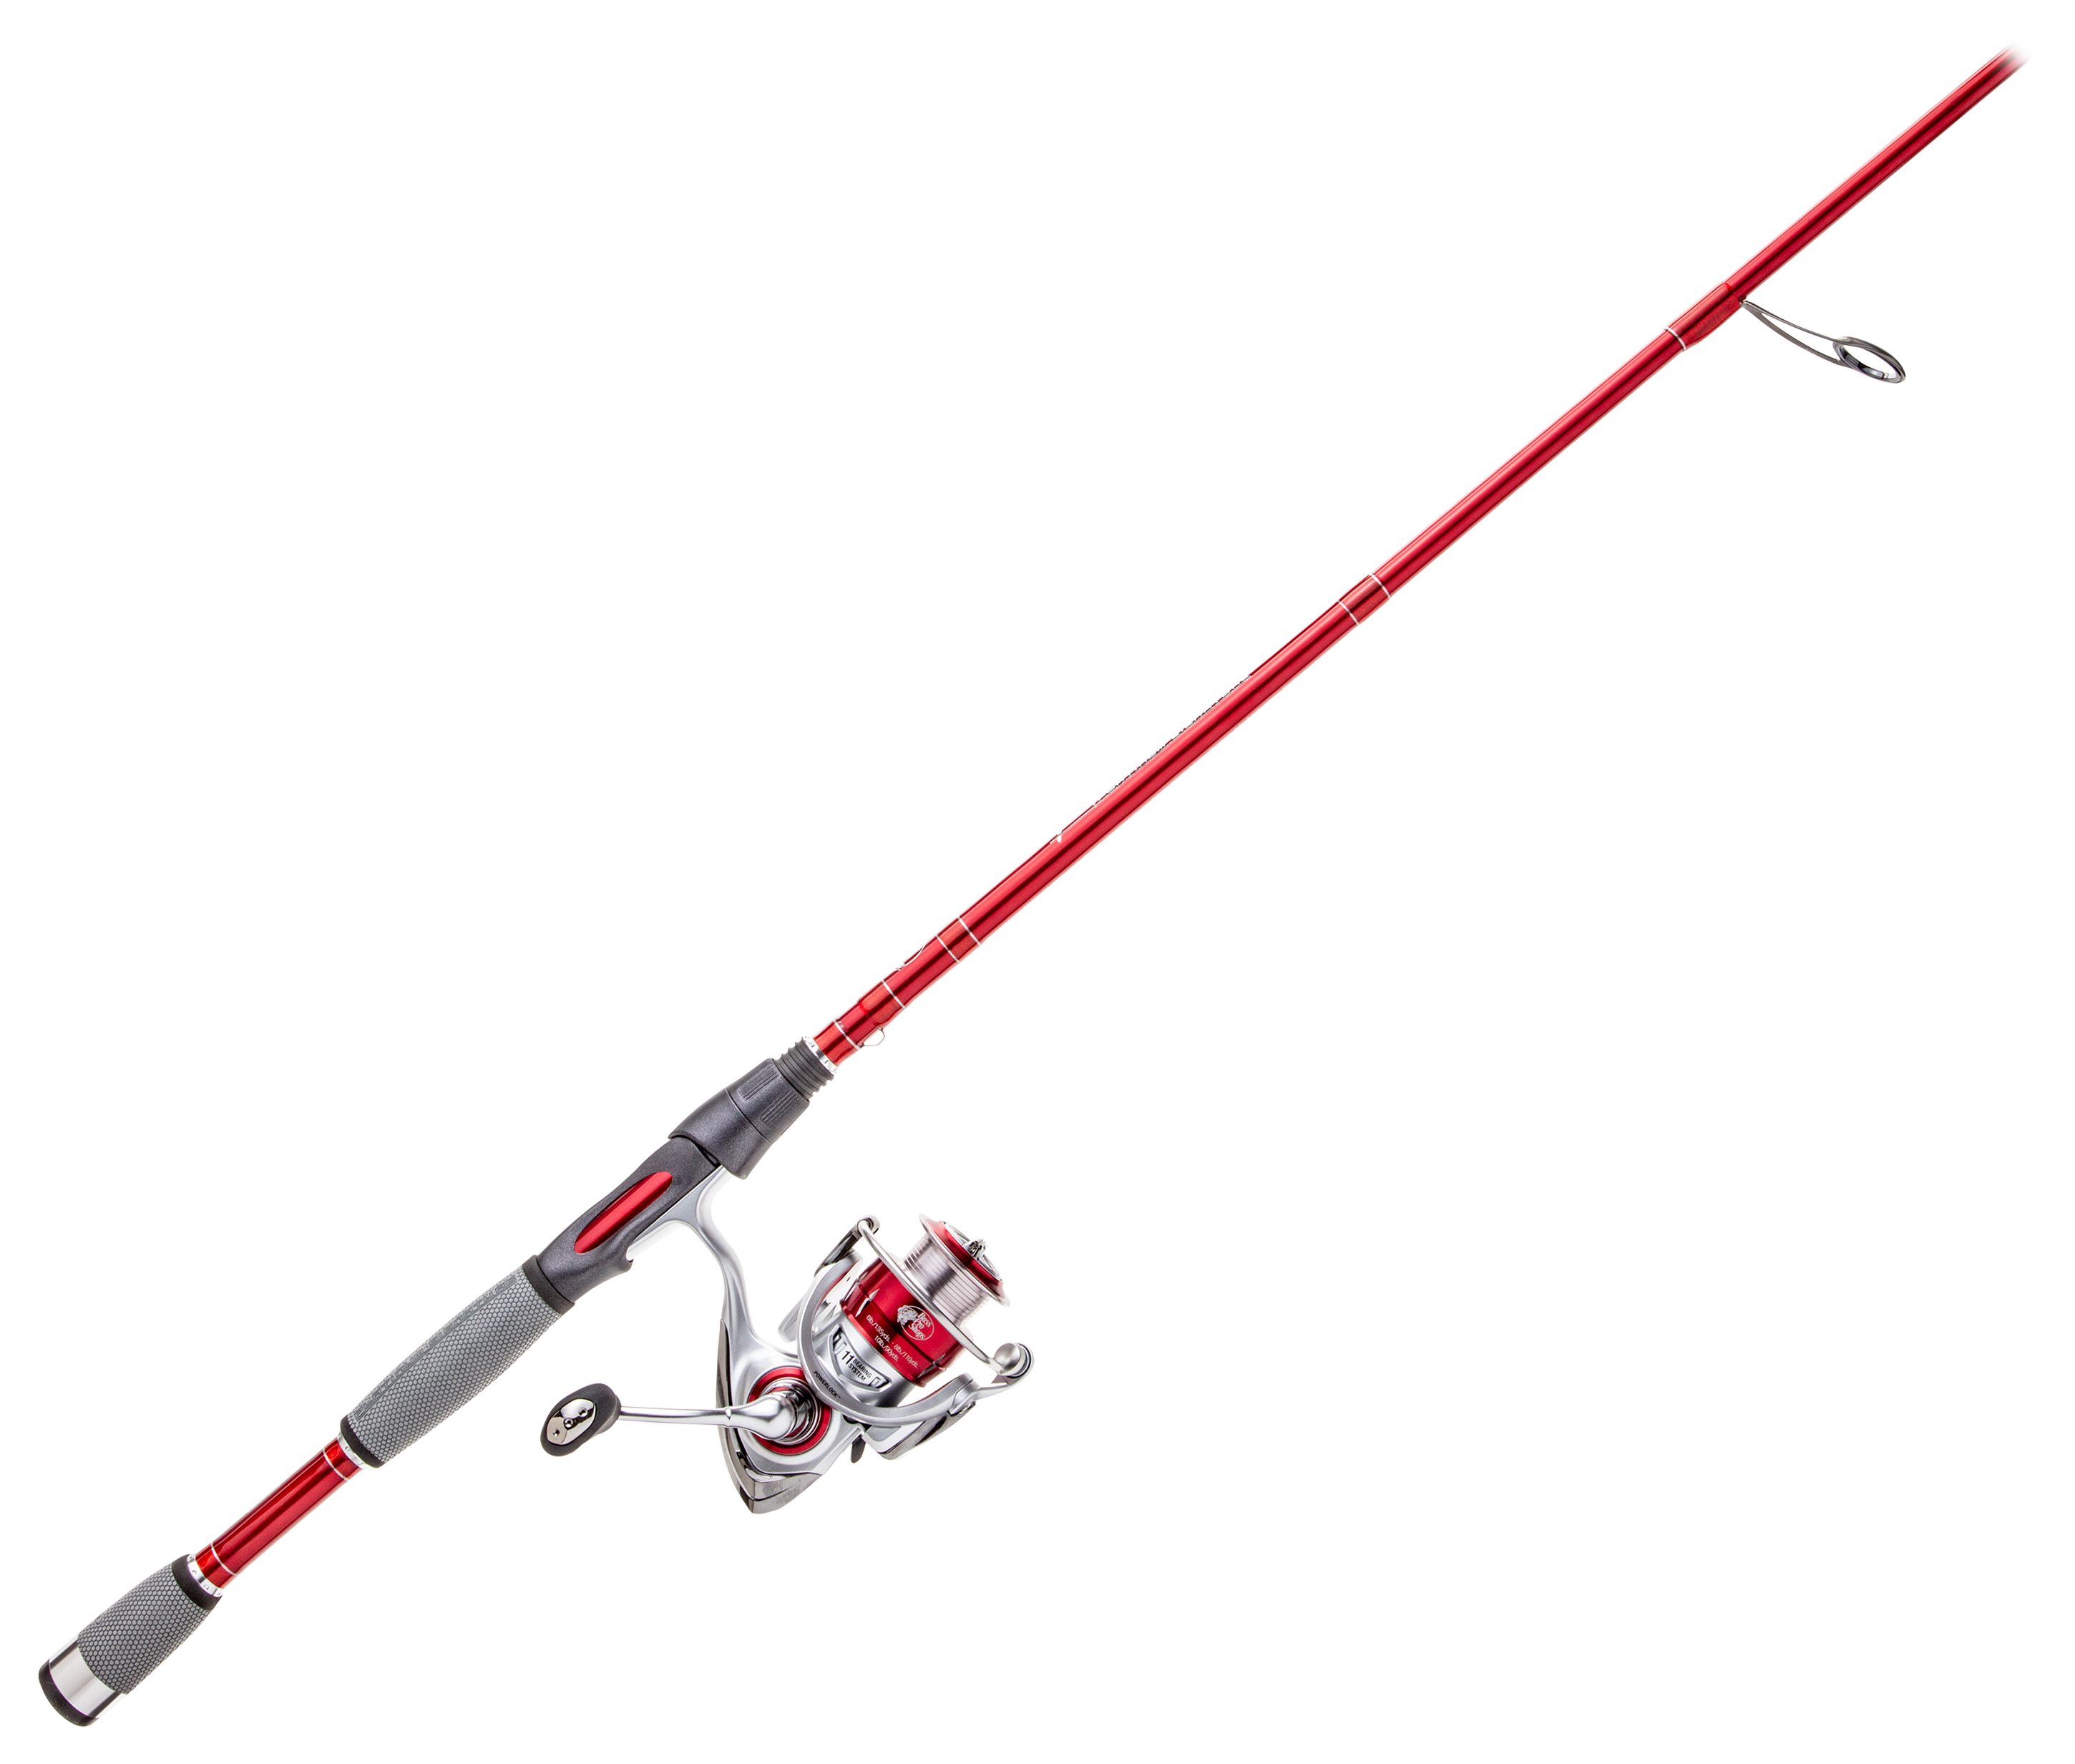 Bass Pro Shops Johnny Morris Platinum Signature Spinning Rod and Reel Combo - 4000 - 6 9  - Med Heavy - 5 7 1